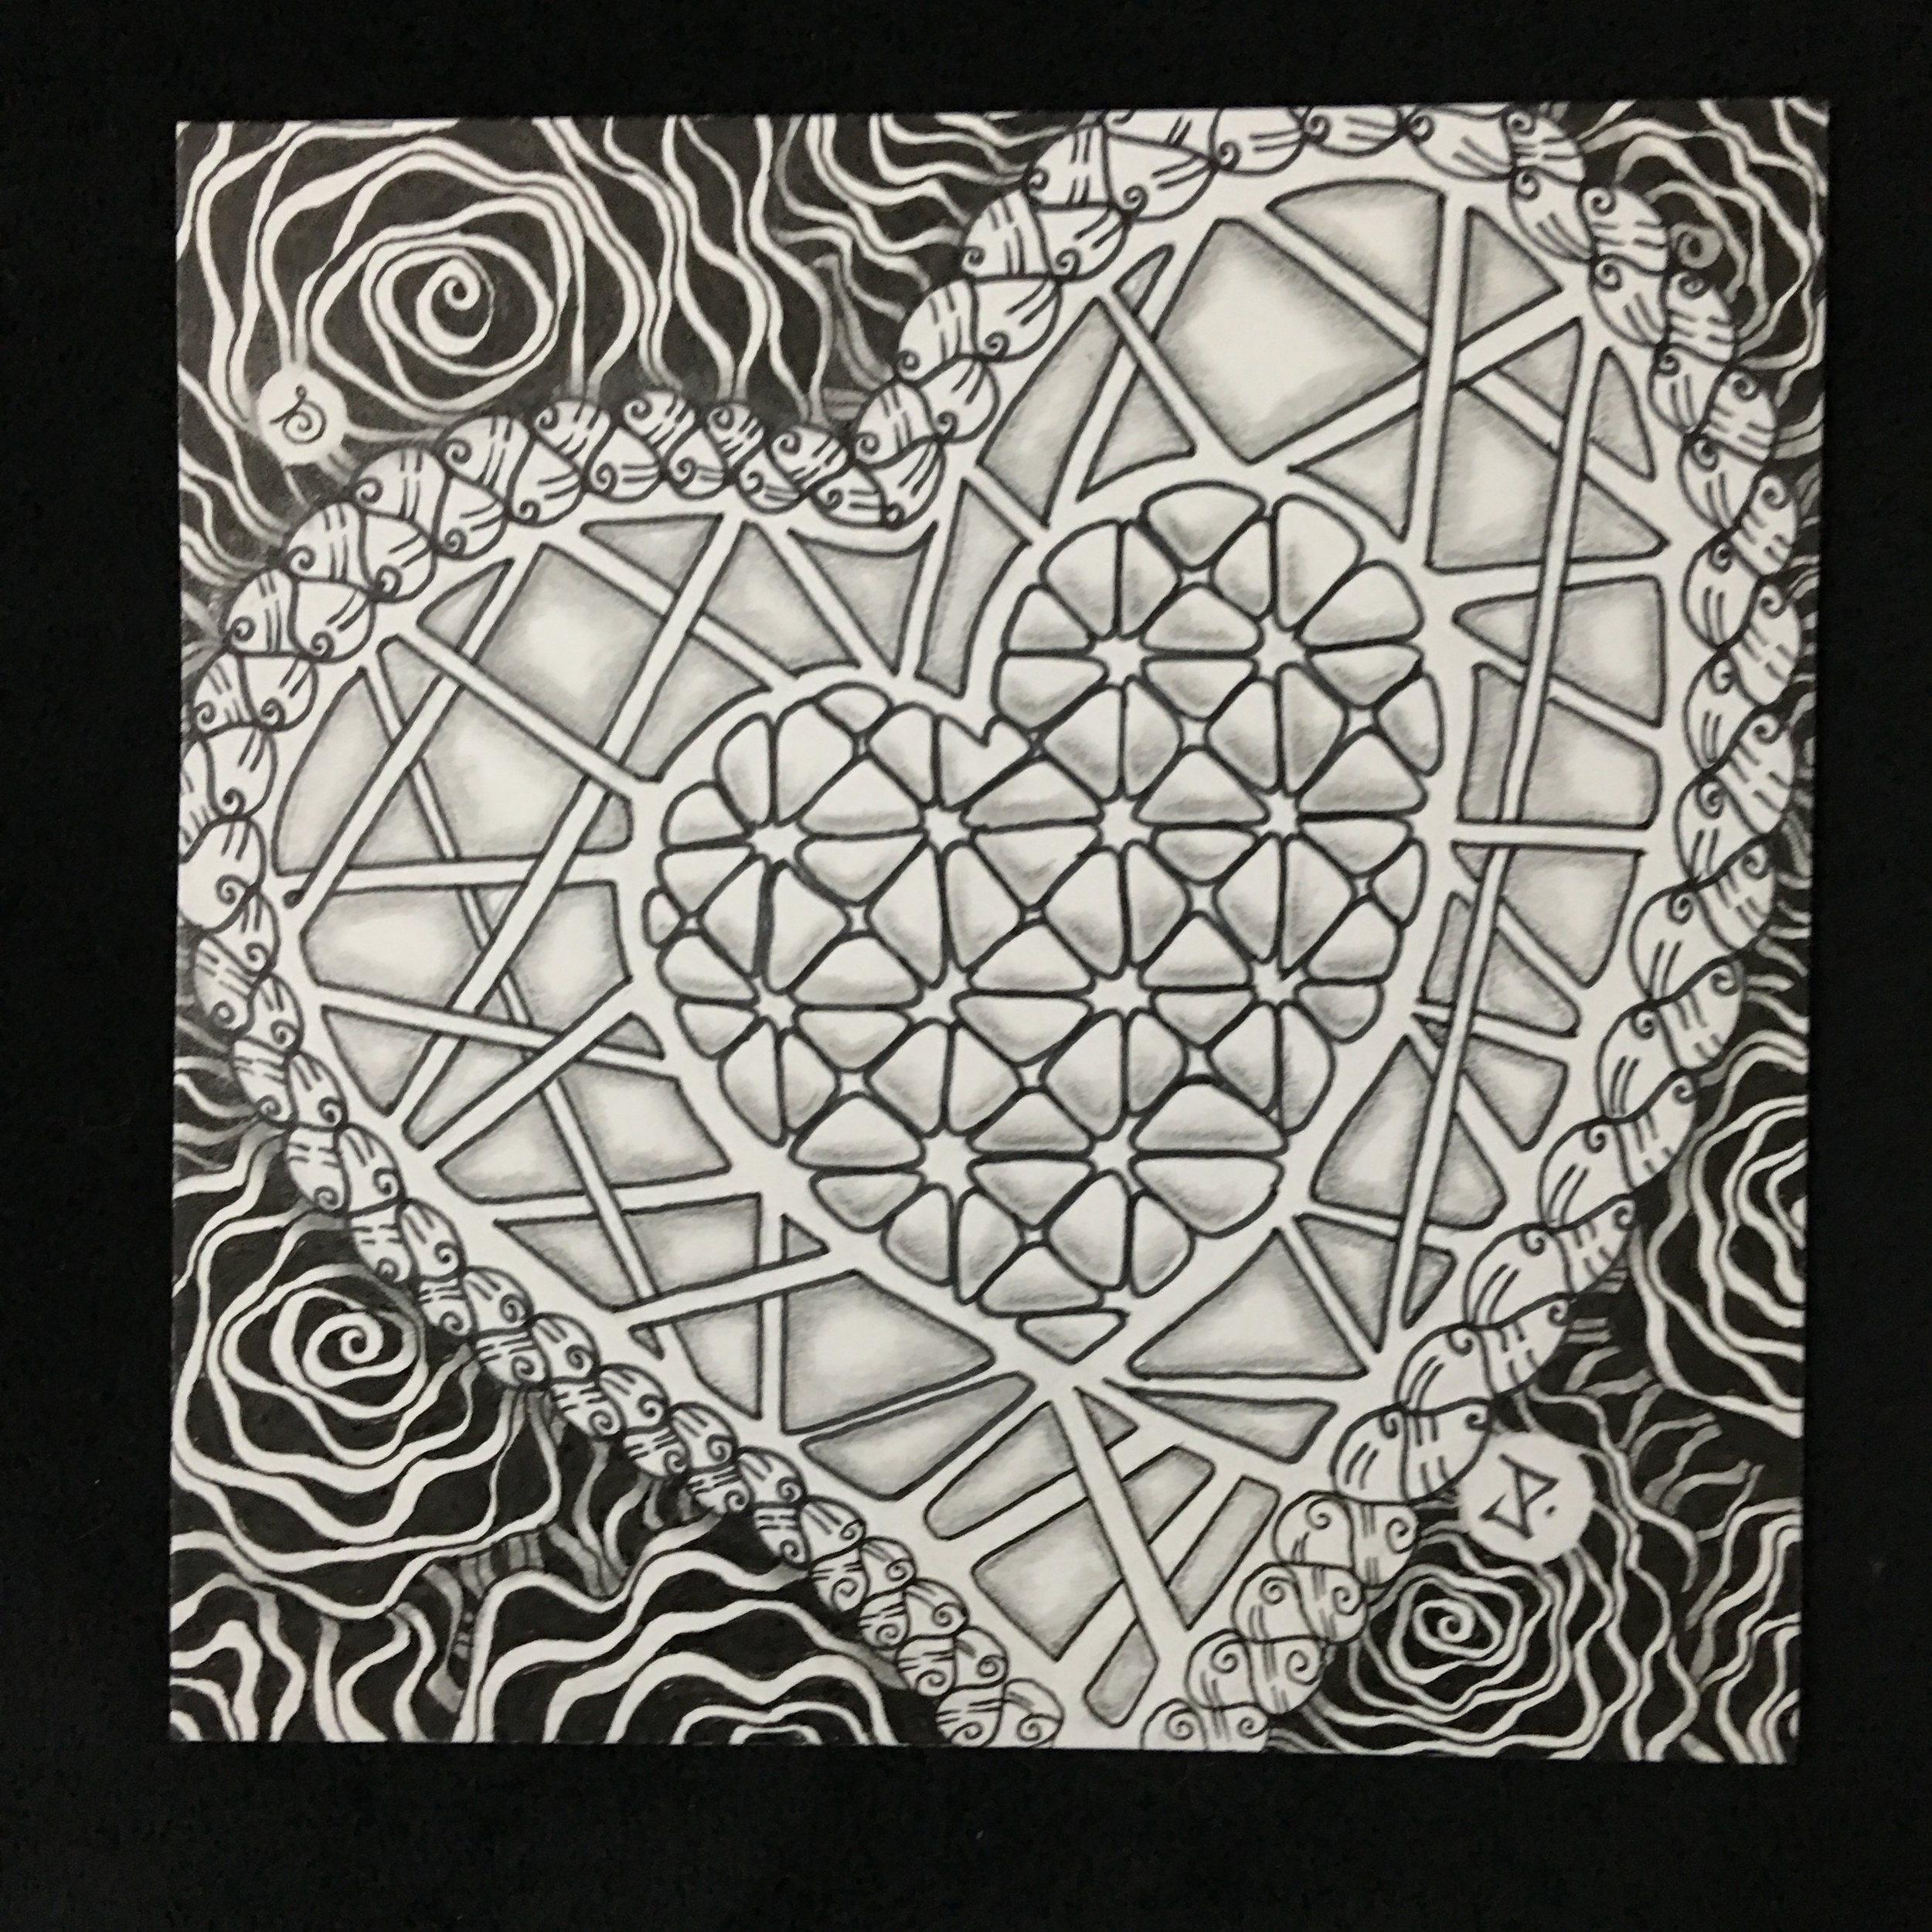 Travelling Tangles Tile- Janet Day and Stephanie Jennifer